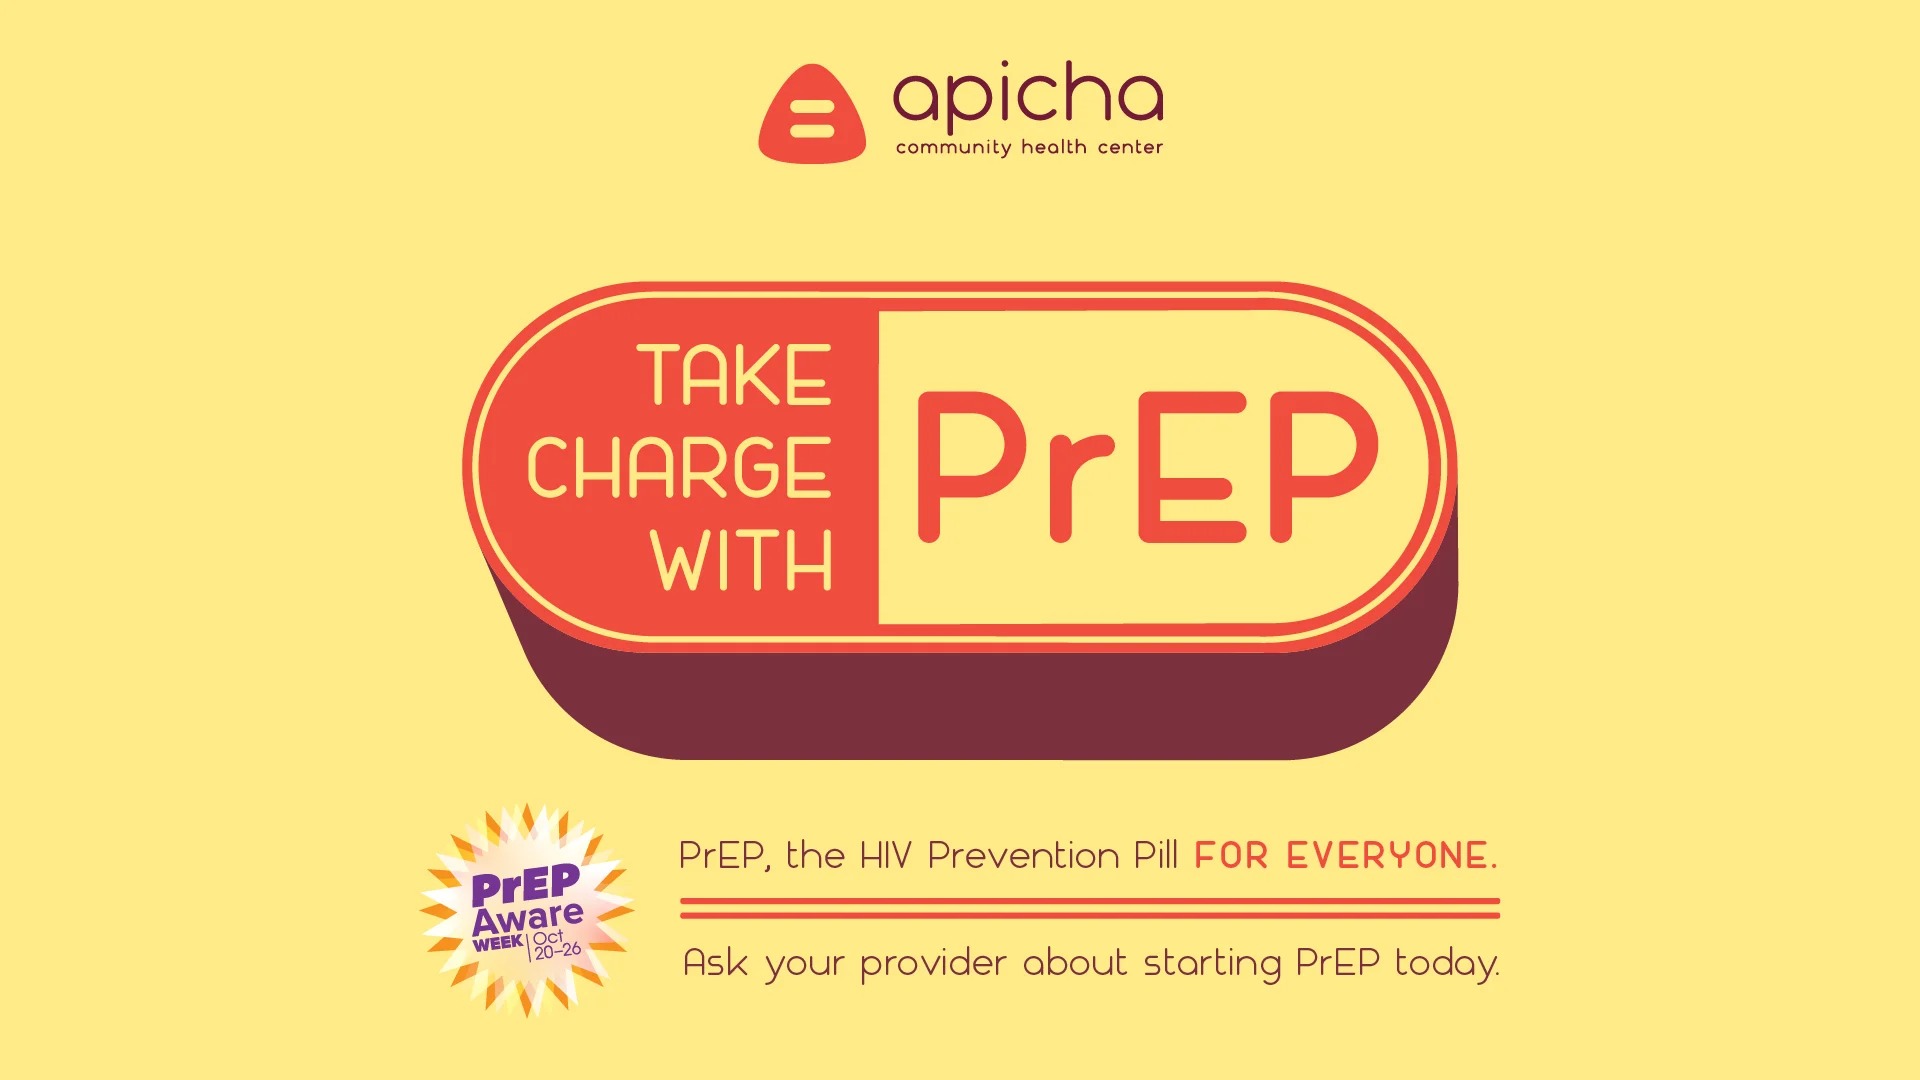 Take charge with PrEP